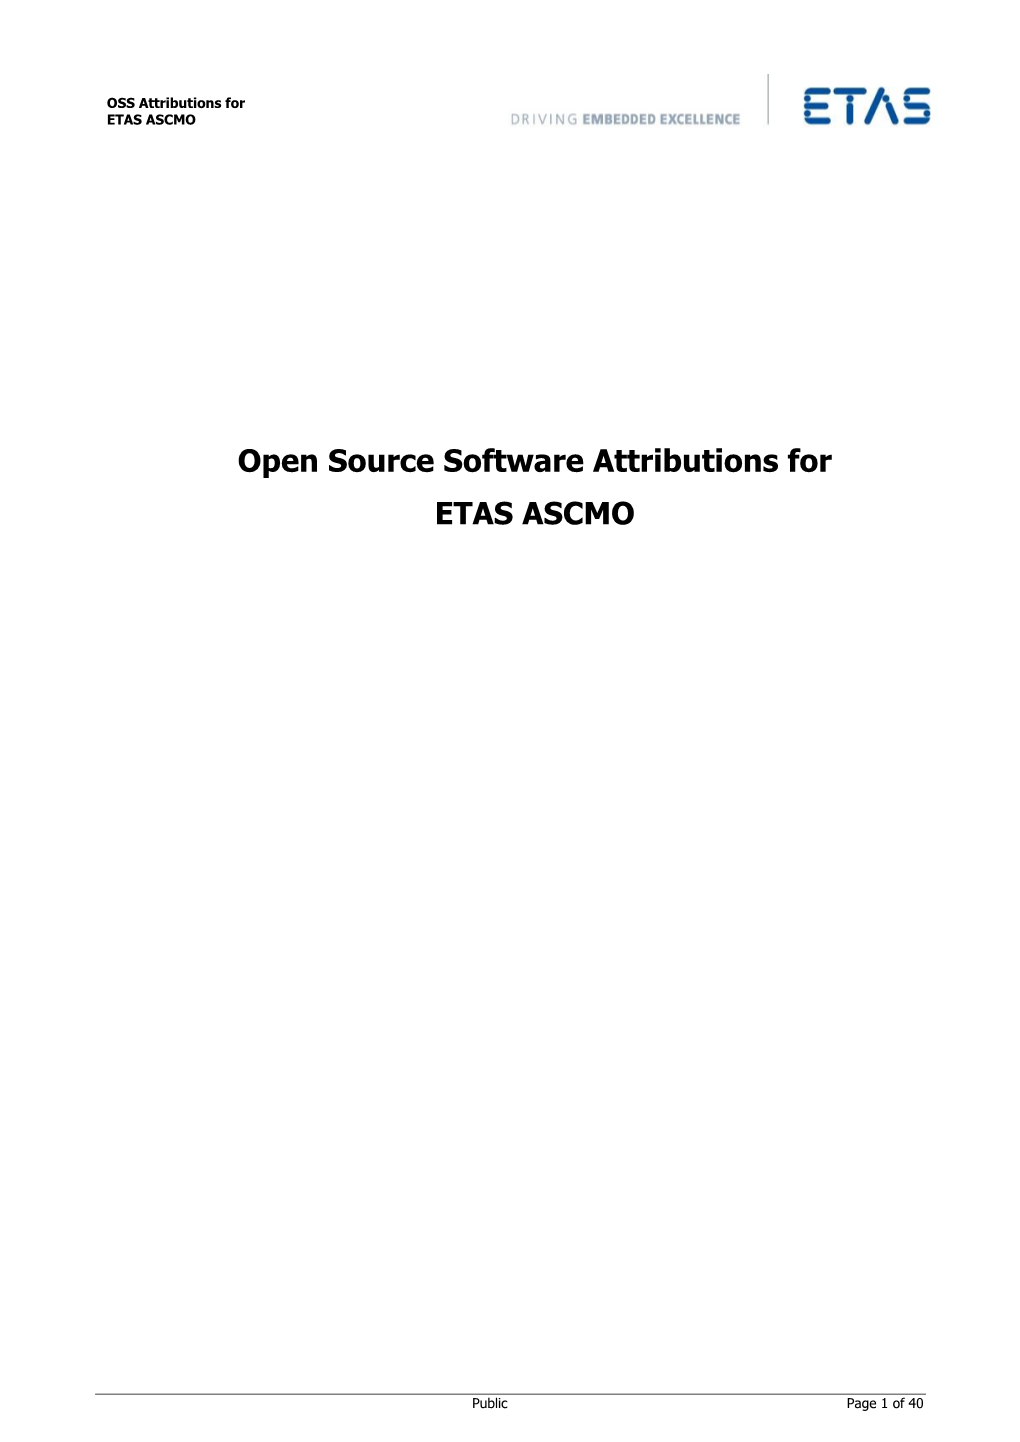 Open Source Software Attributions for ETAS ASCMO